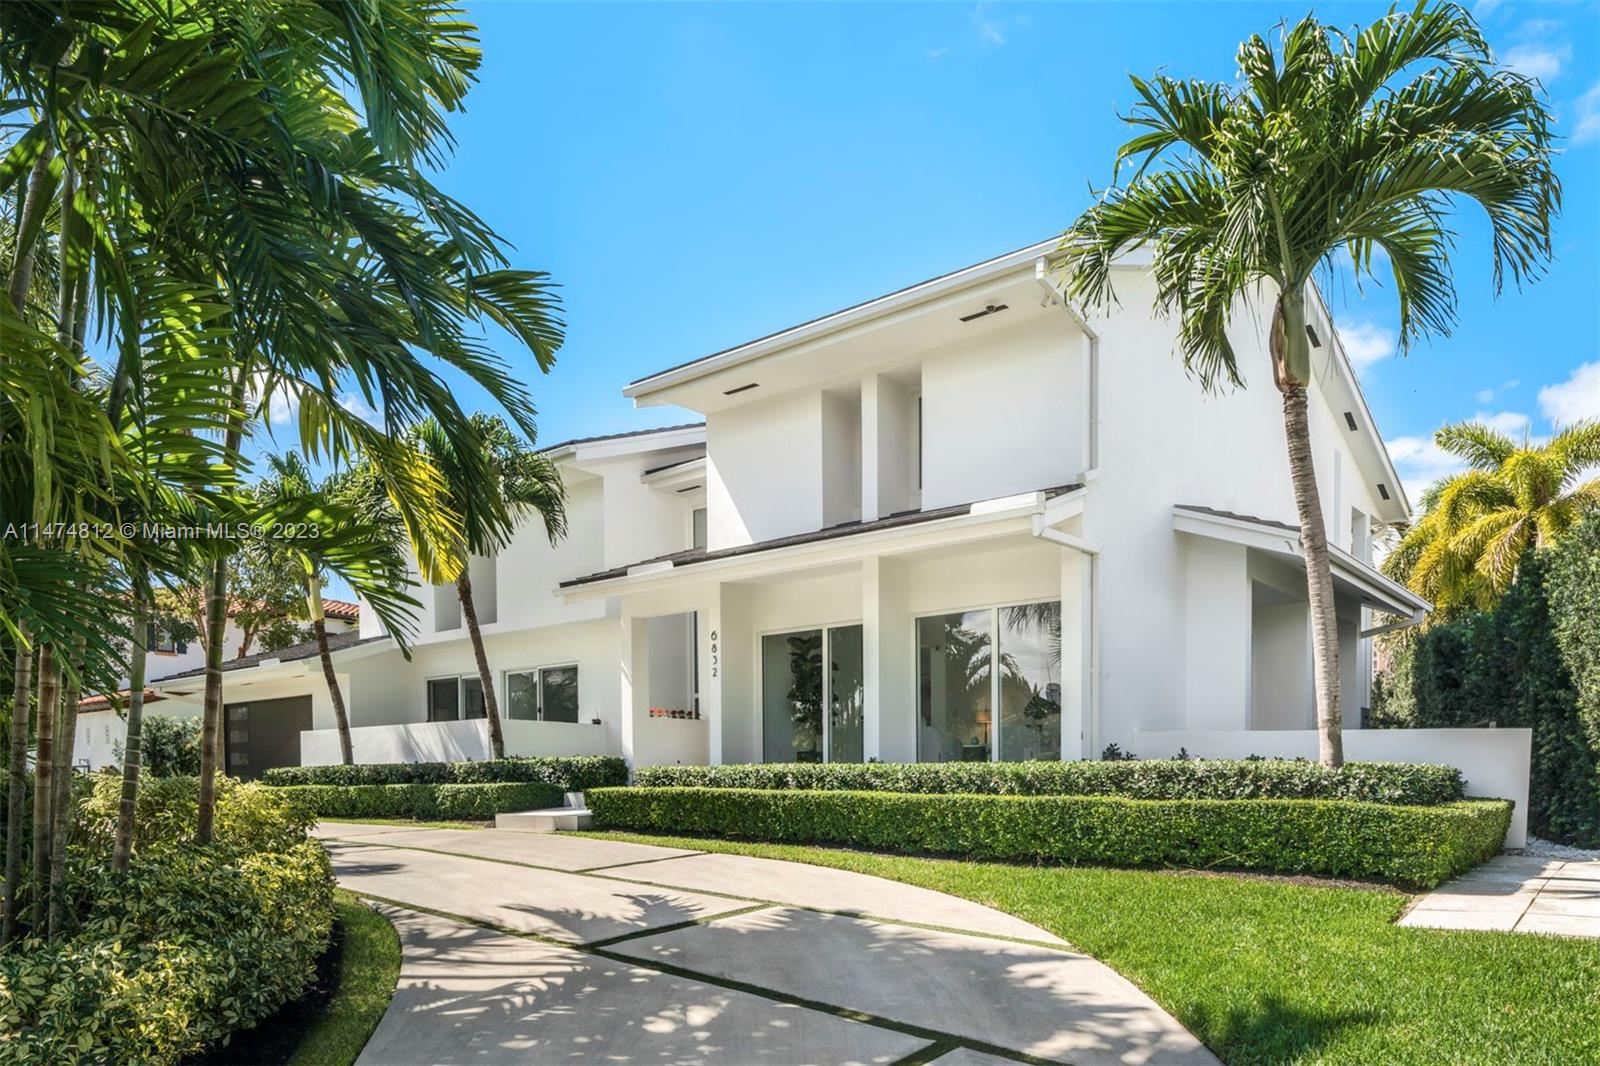 6832 Sunrise Ct, Coral Gables, Florida 33133, 5 Bedrooms Bedrooms, ,6 BathroomsBathrooms,Residential,For Sale,6832 Sunrise Ct,A11474812